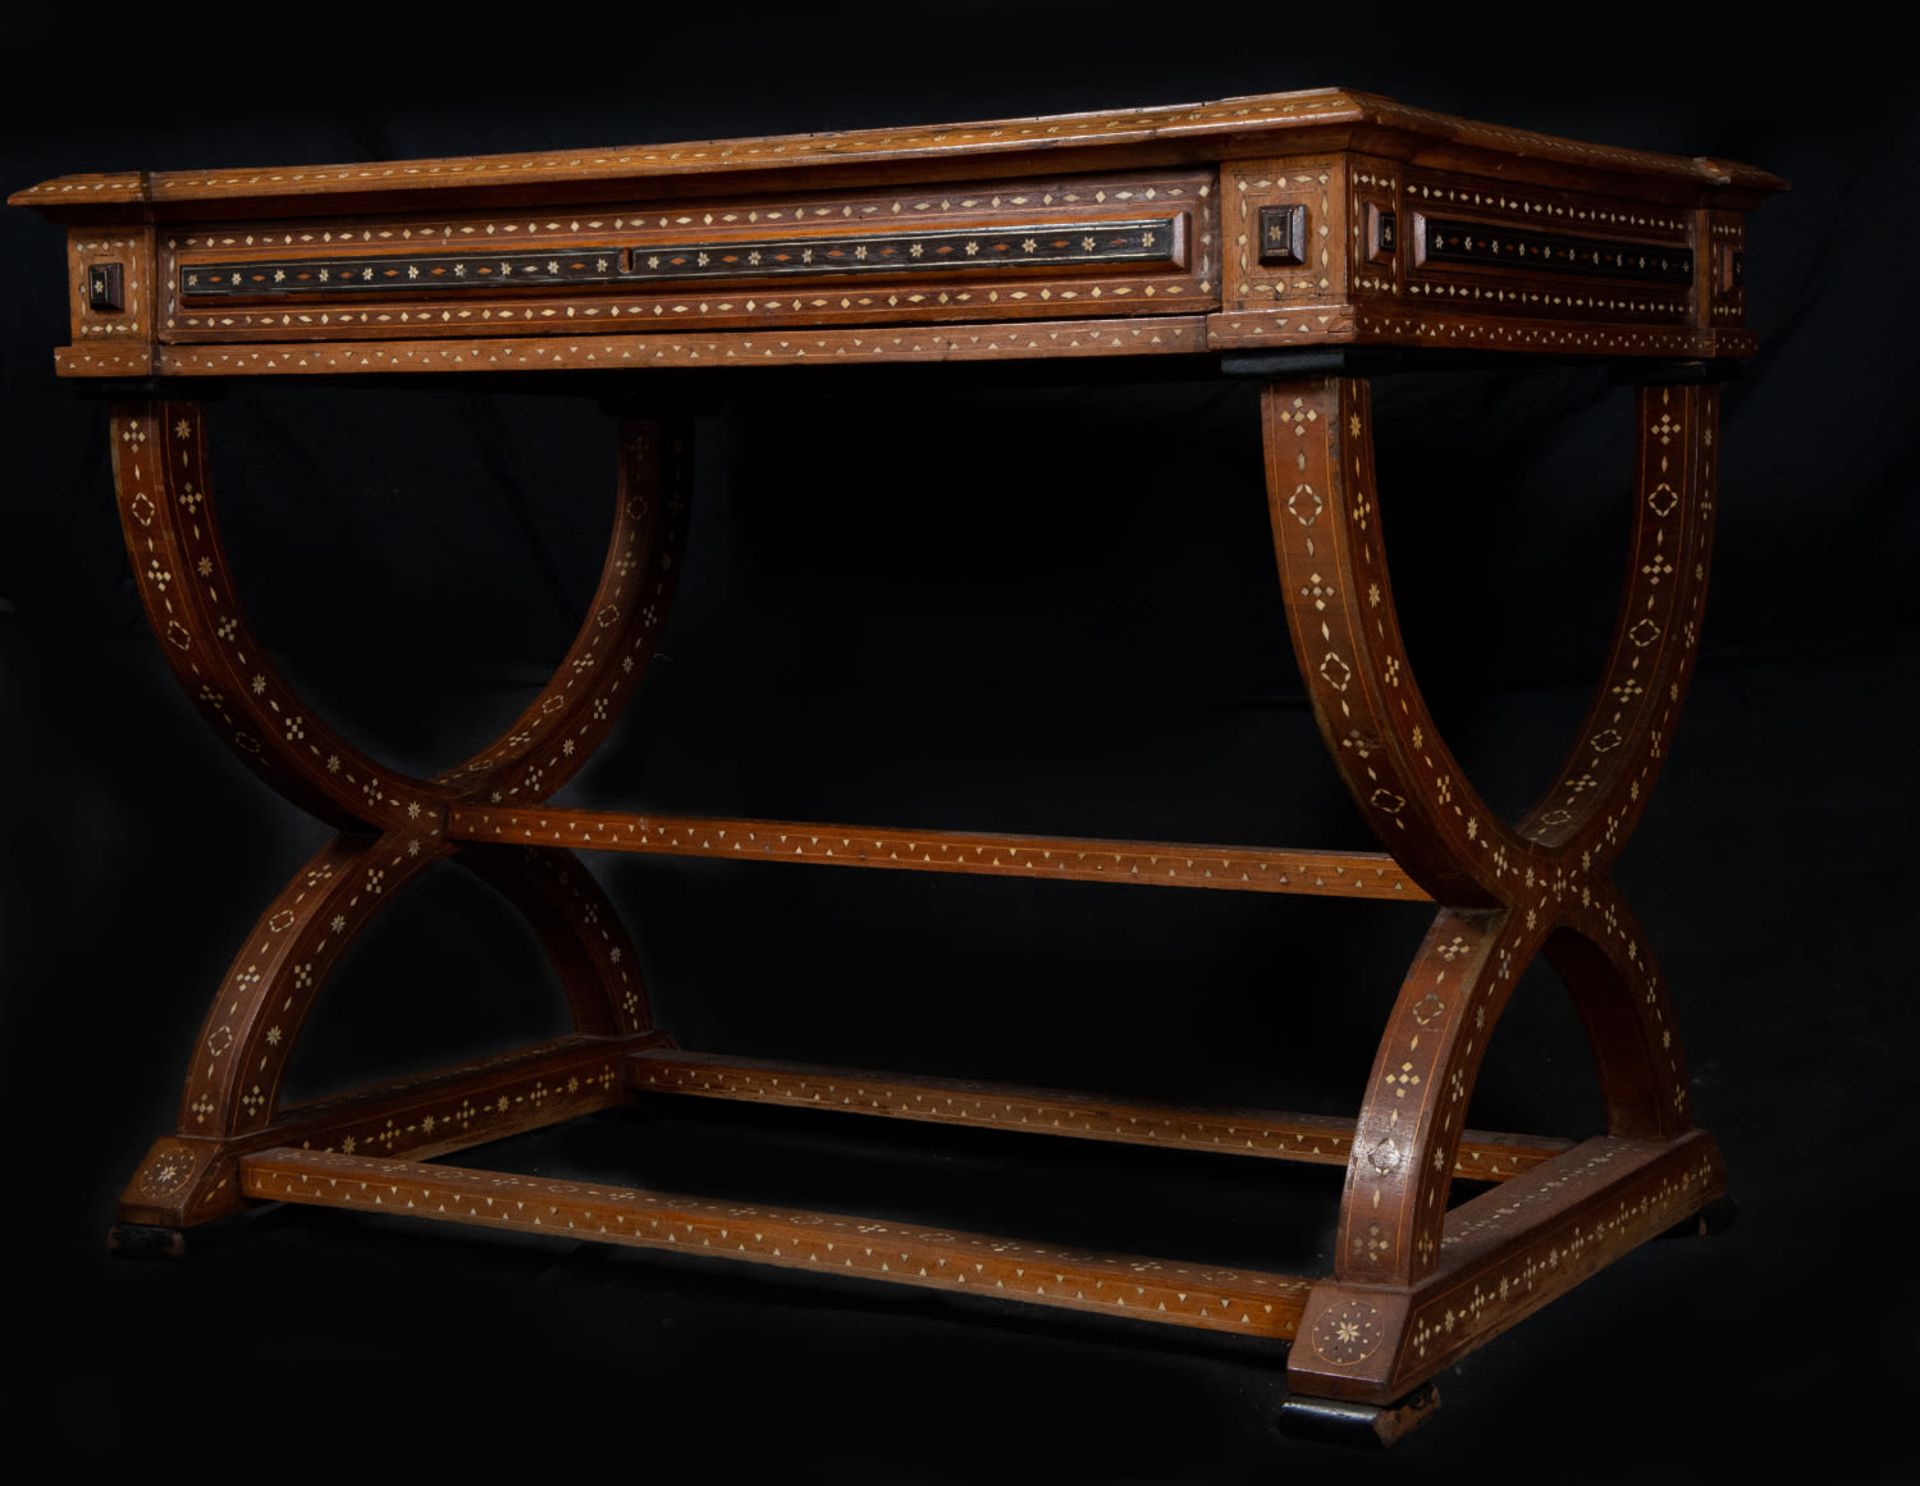 Exceptional Piedmontese Table in Bone inlay, Italian work of the 18th century - Image 5 of 7